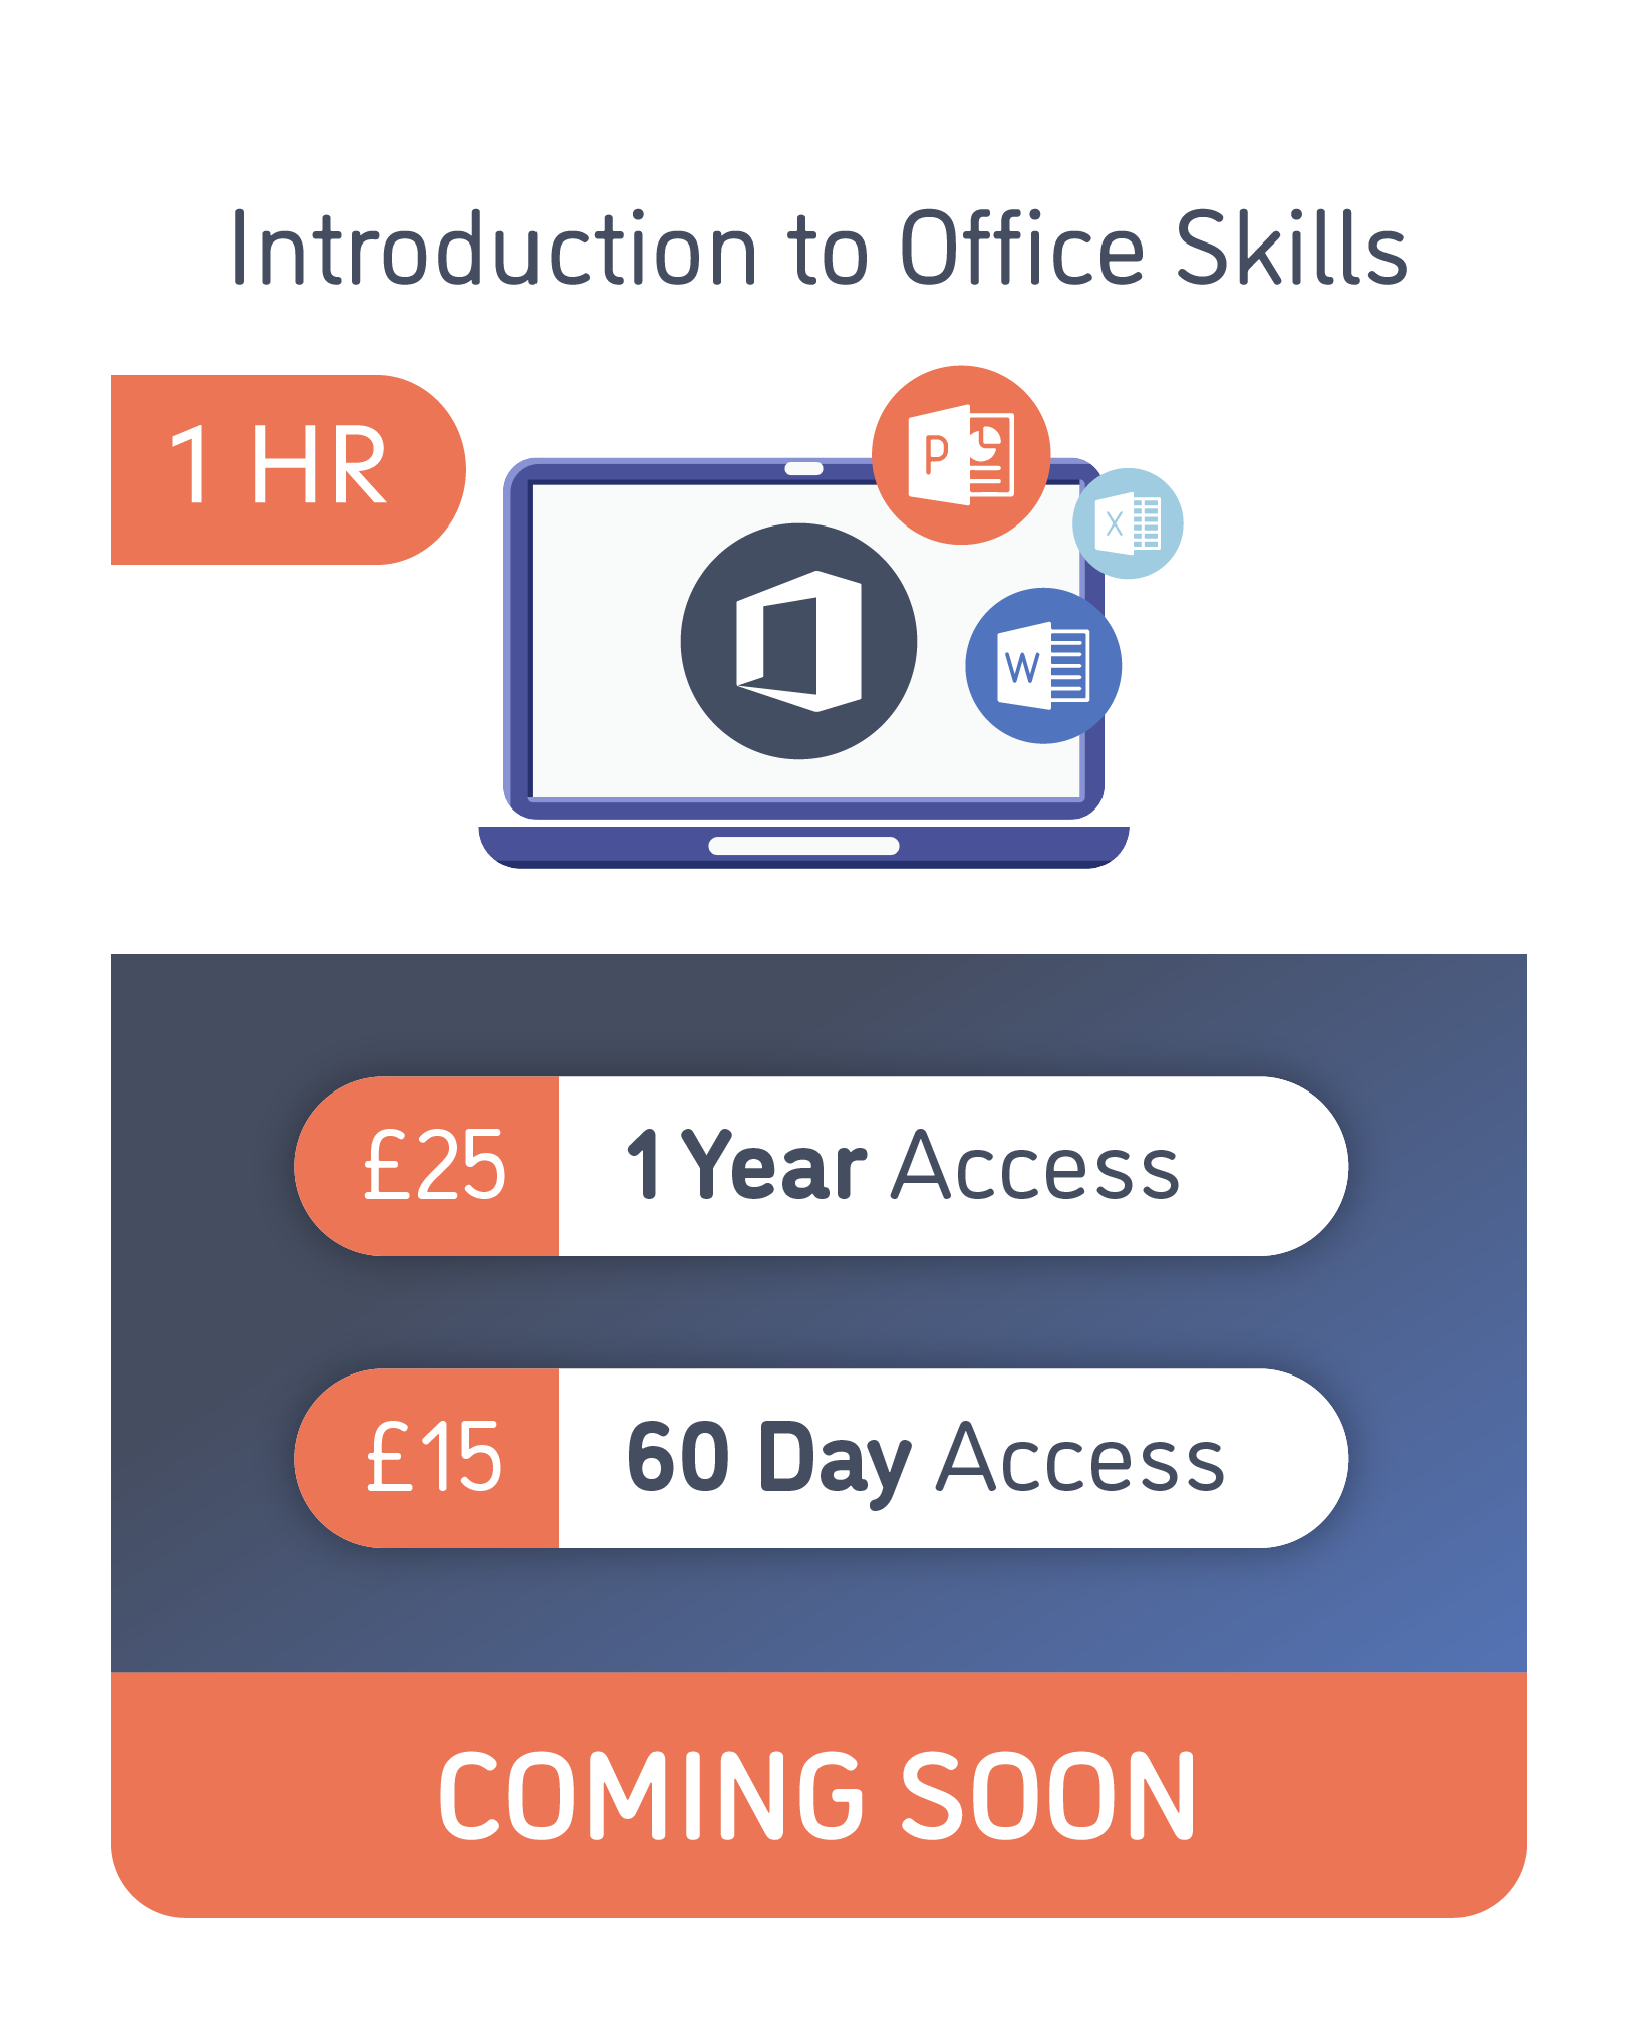 An image of Introduction to Office Skills, which shows the pricing options and when clicked link to the course description 